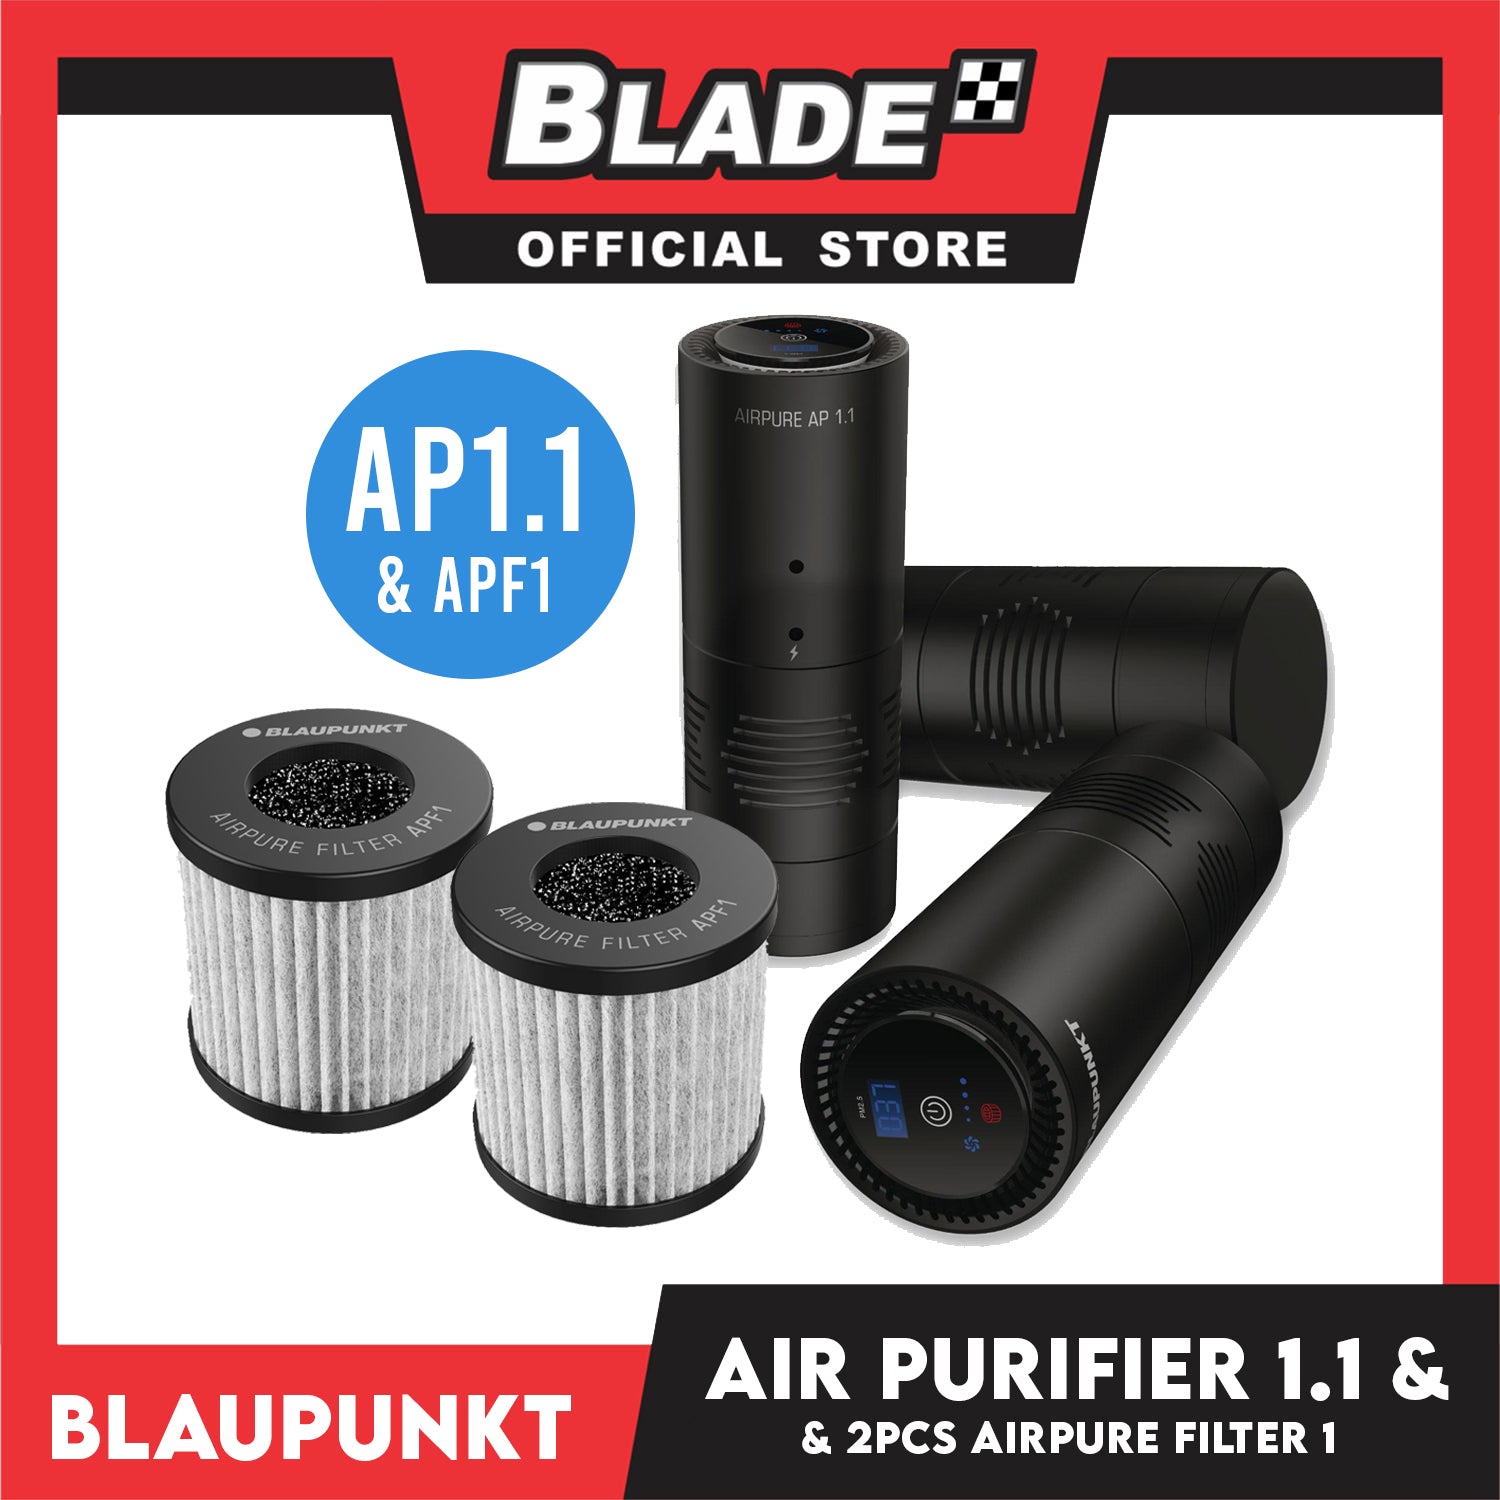 Blaupunkt Air Purifier and Filter Airpure AP 1.1 and APF1 – blade.ph